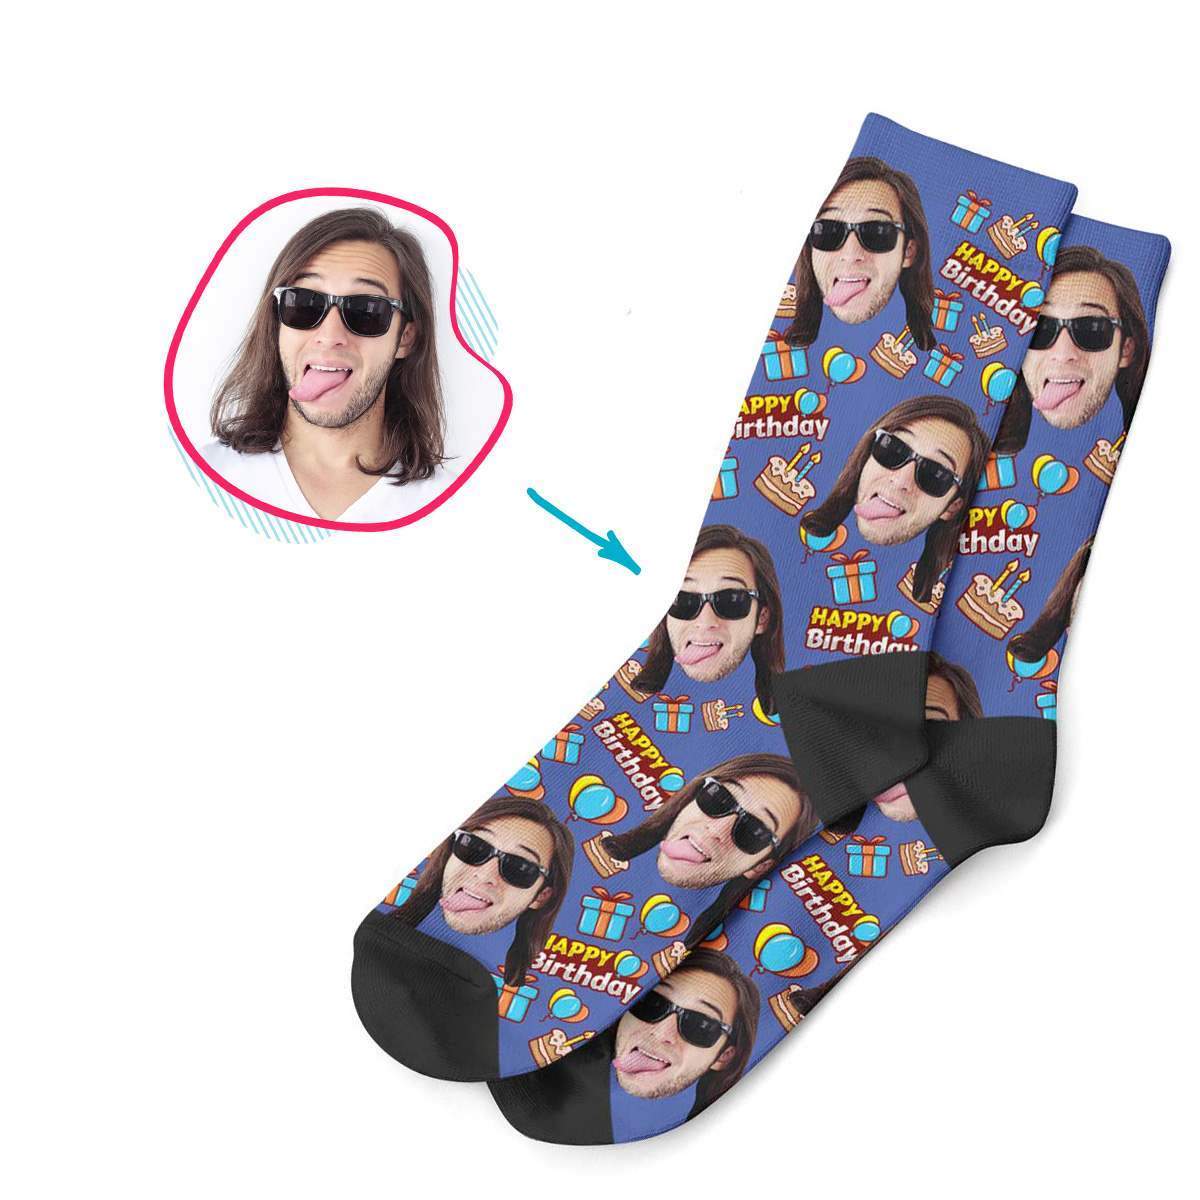 darkblue Birthday socks personalized with photo of face printed on them